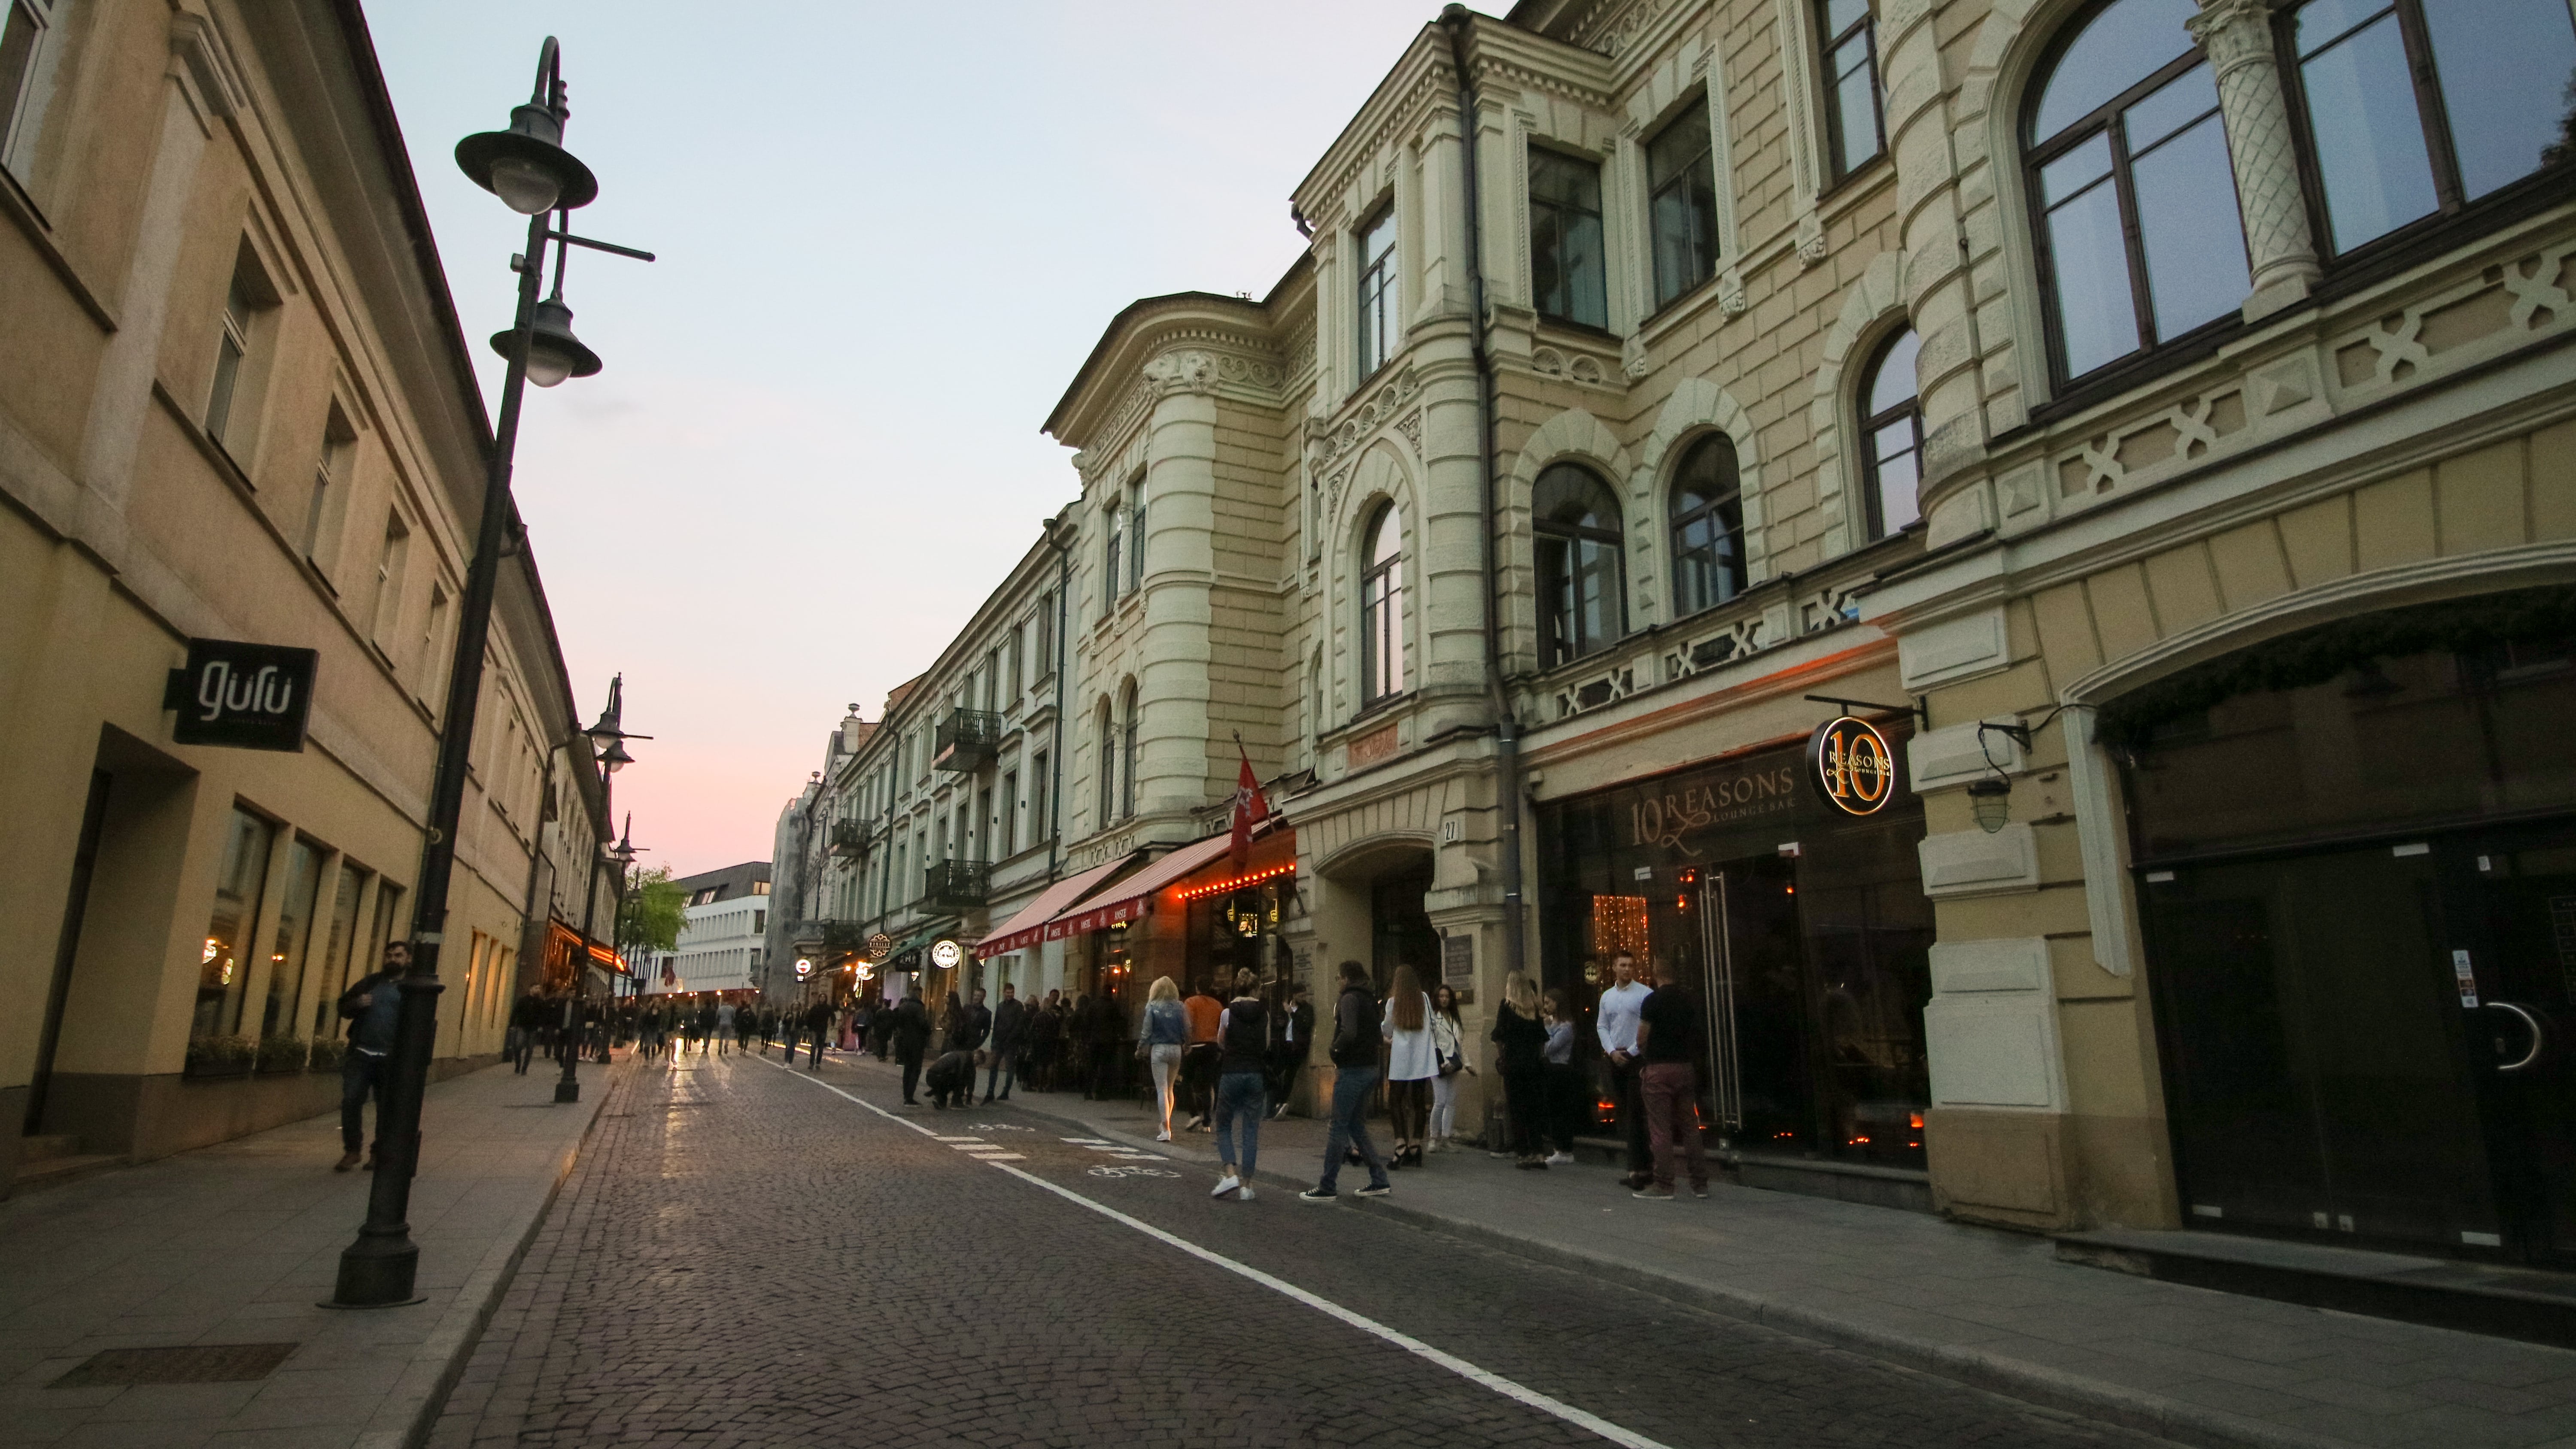 LOCAL & STREET FOOD COMBINED WITH AN EVENING DRINK IN VILNIUS